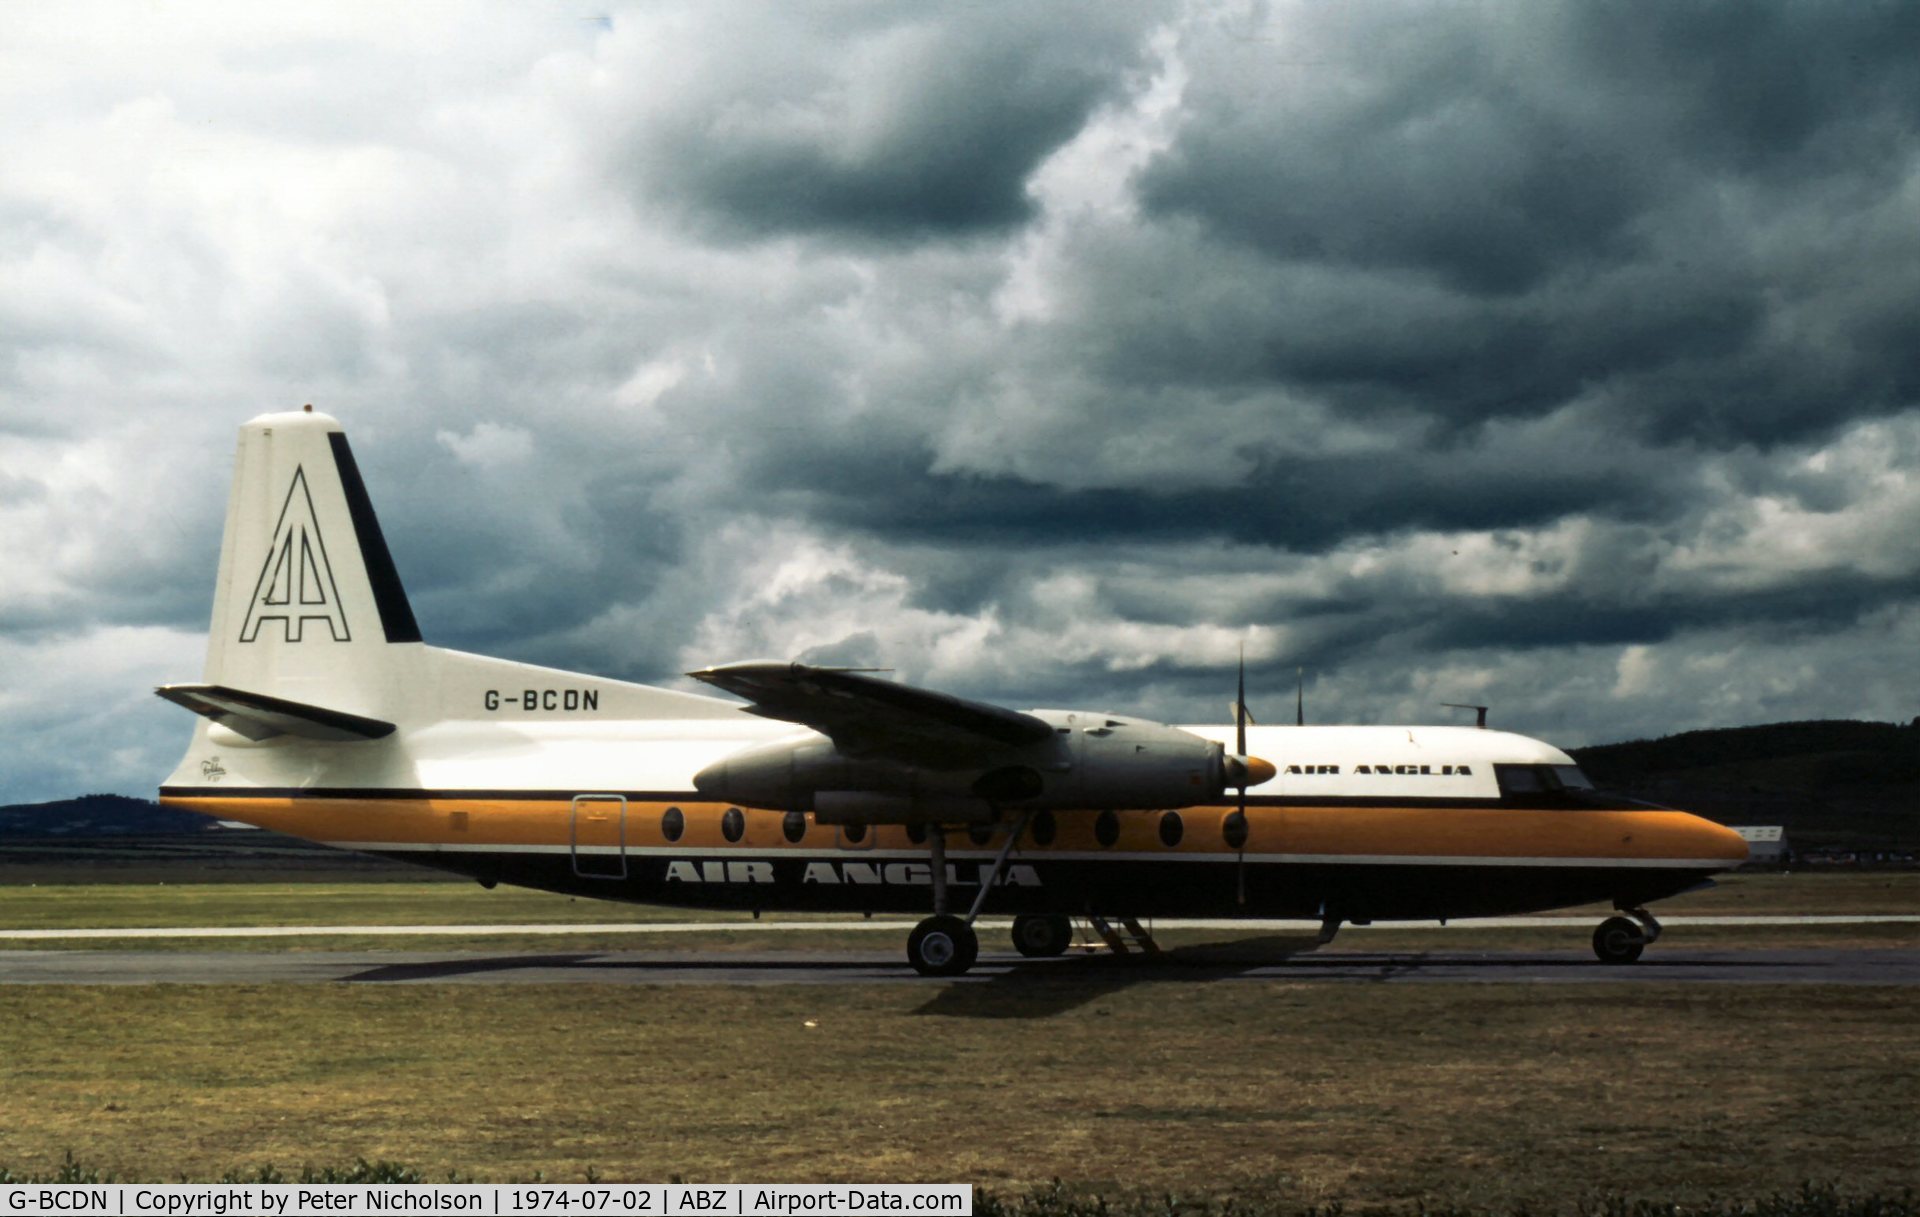 G-BCDN, 1963 Fokker F-27-200 Friendship C/N 10201, F-27 Friendship of Air Anglia at Aberdeen in the Summer of 1974.